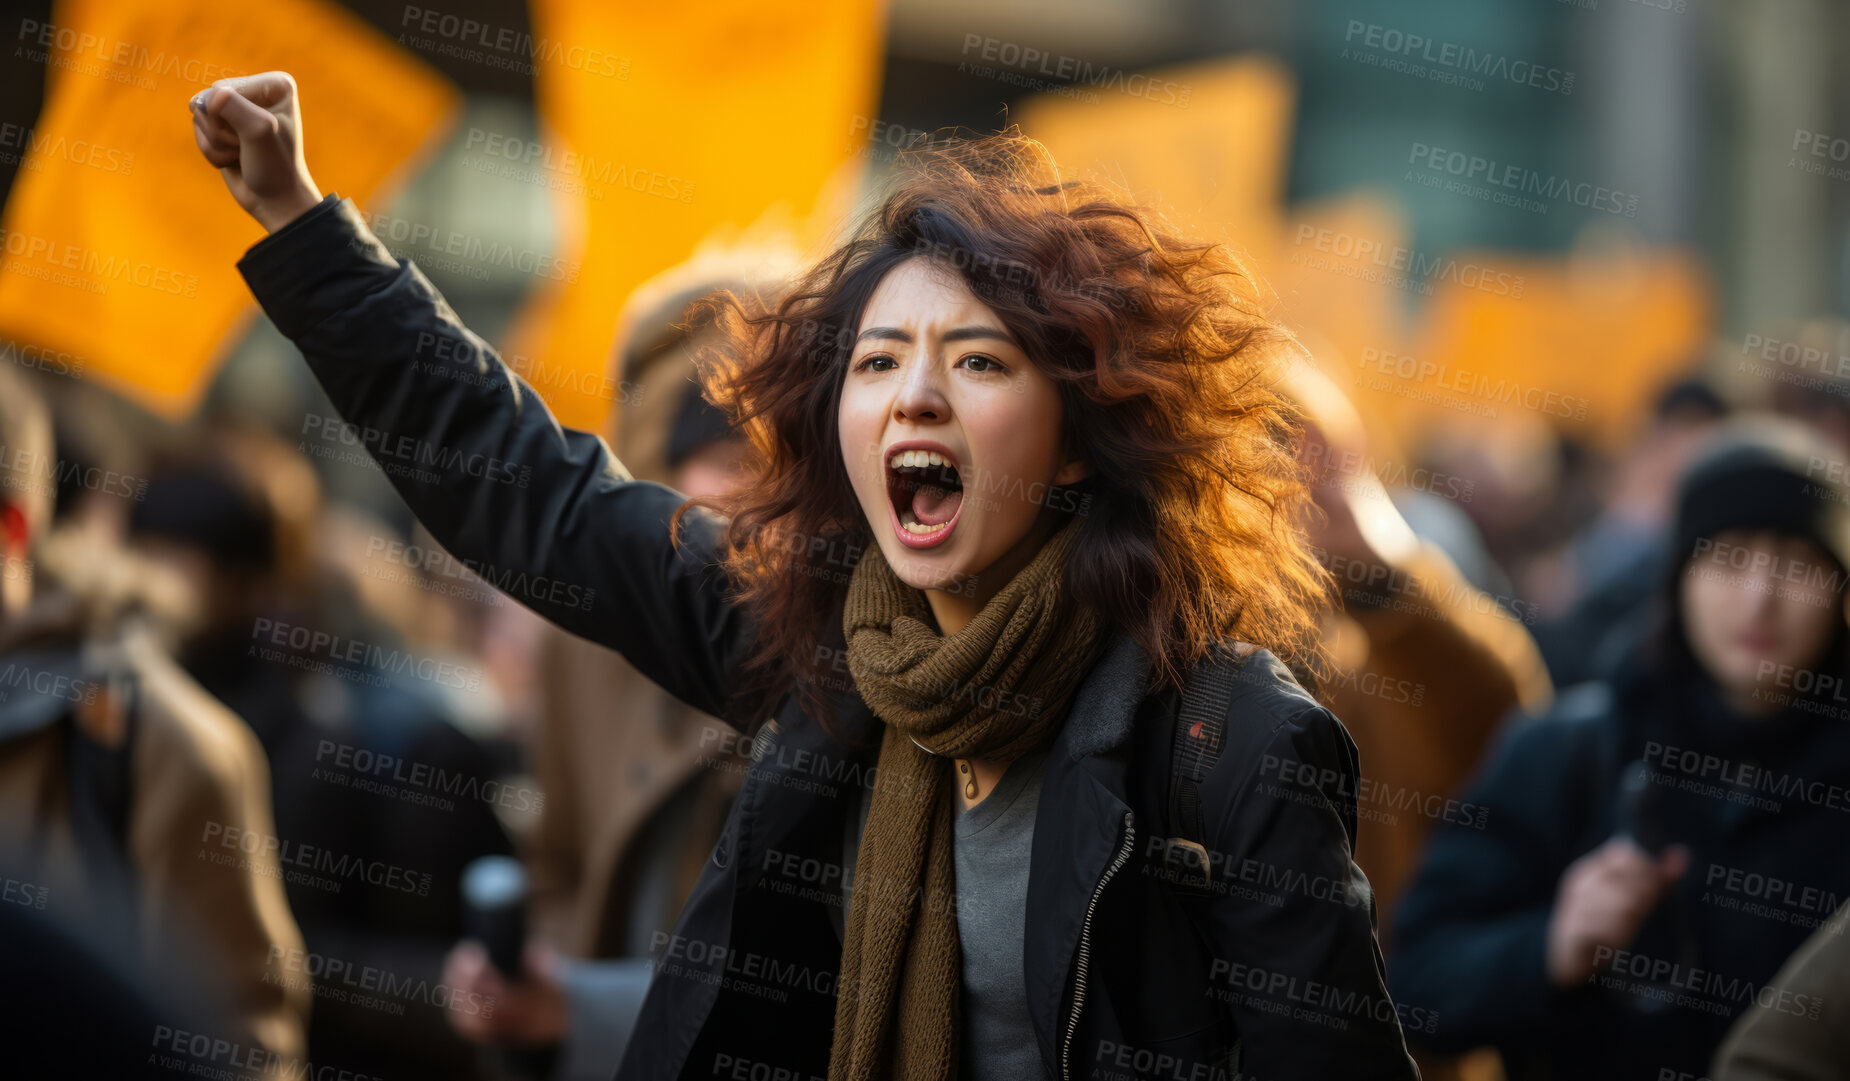 Buy stock photo Asian american protester raising fist. Human rights. Activism concept.